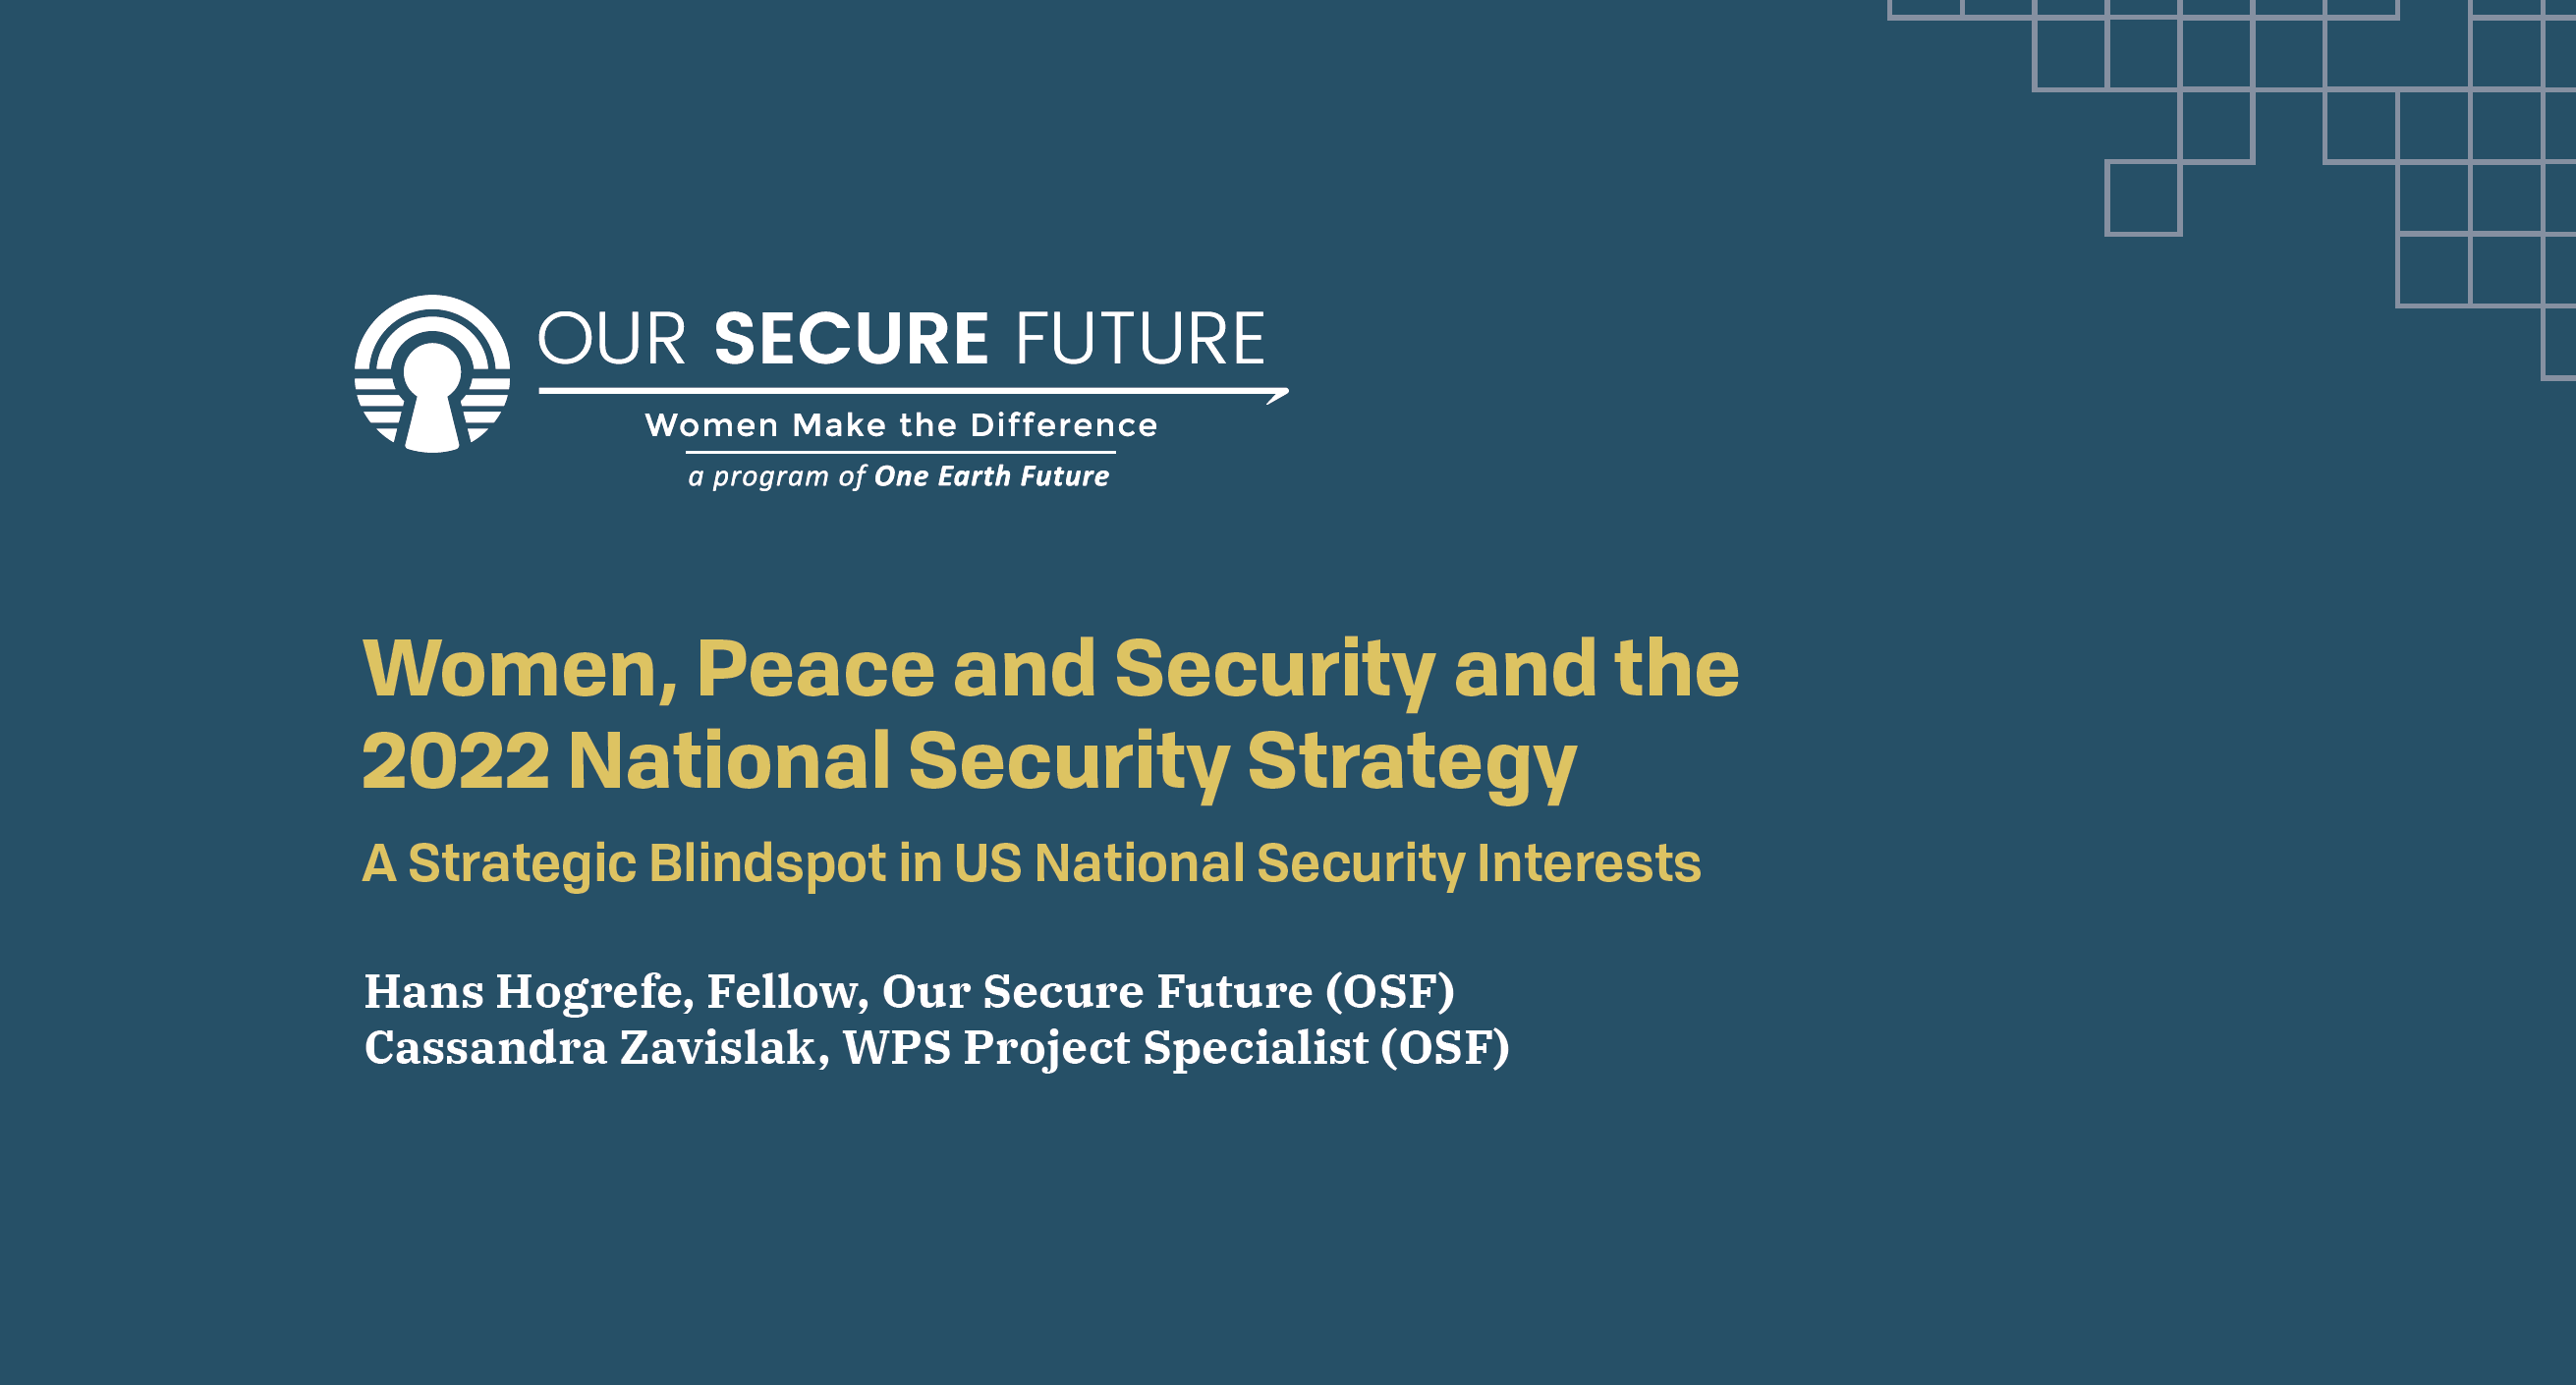 Research & Analysis | Our Secure Future